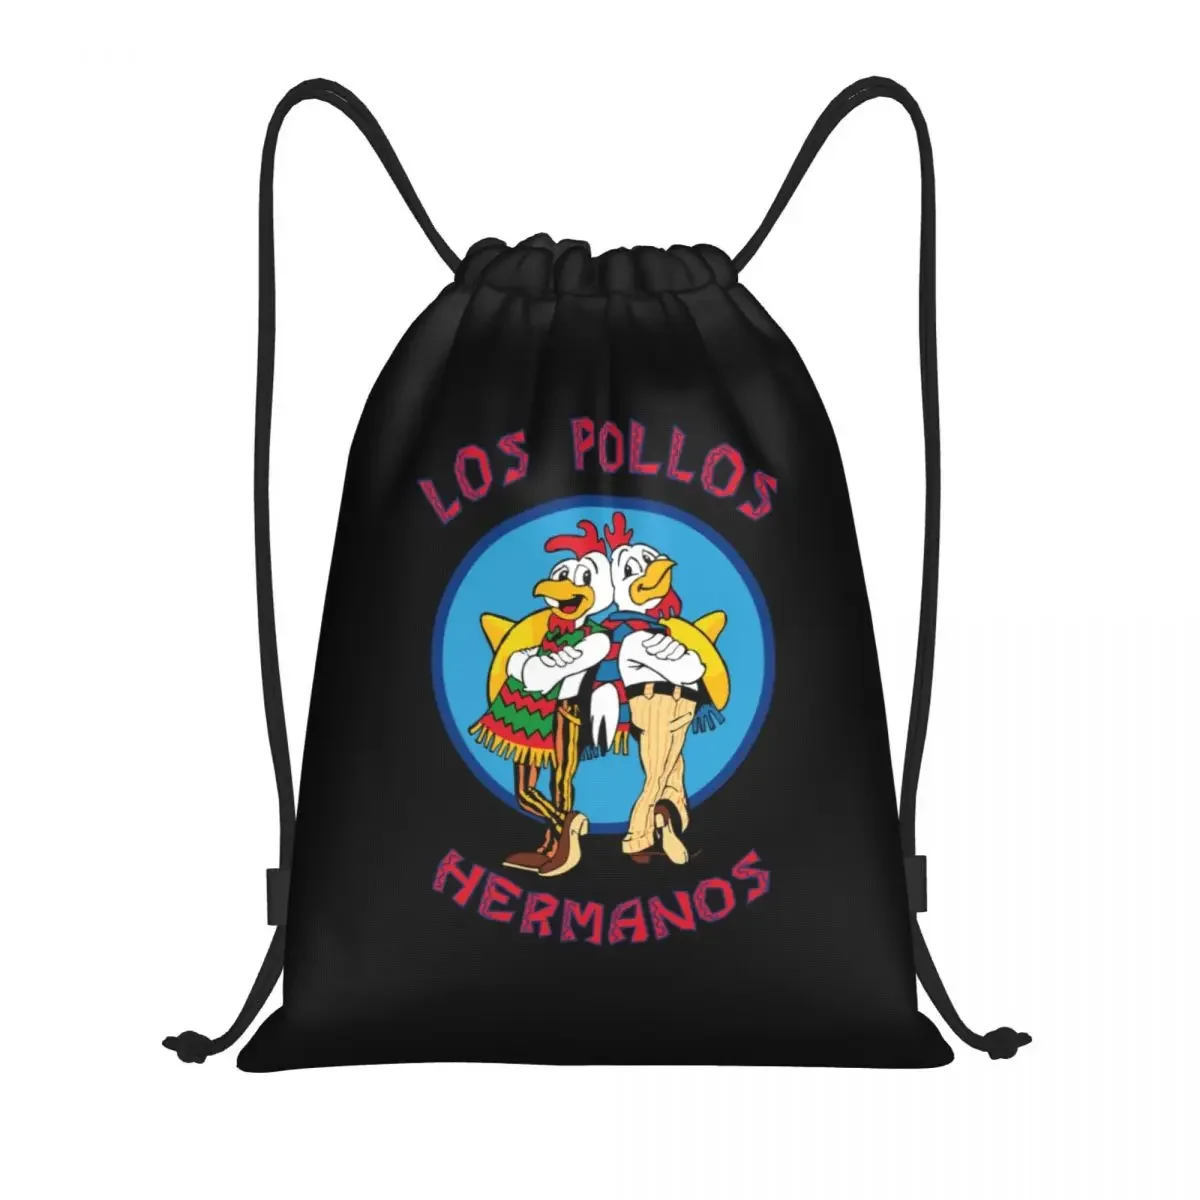 

Los Pollos Hermanos Breaking Bad Drawstring Backpack Sports Gym Bag for Women Men The Chicken Brothers Training Sackpack